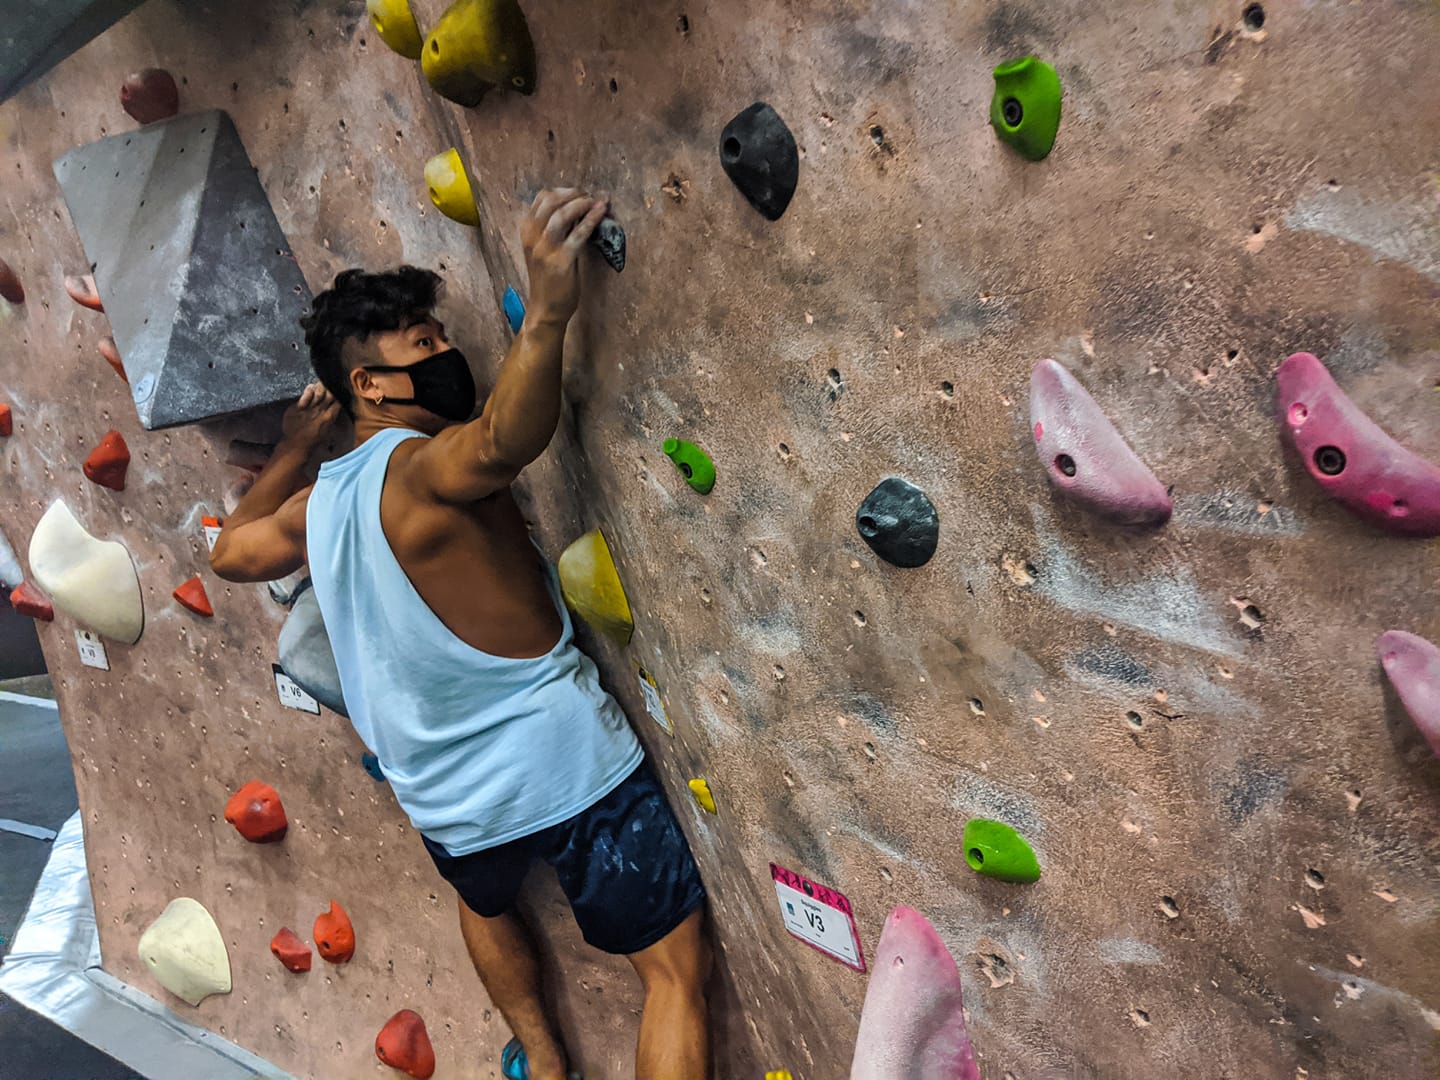 How To: Mental Training On and Off the Wall for Peak Performance